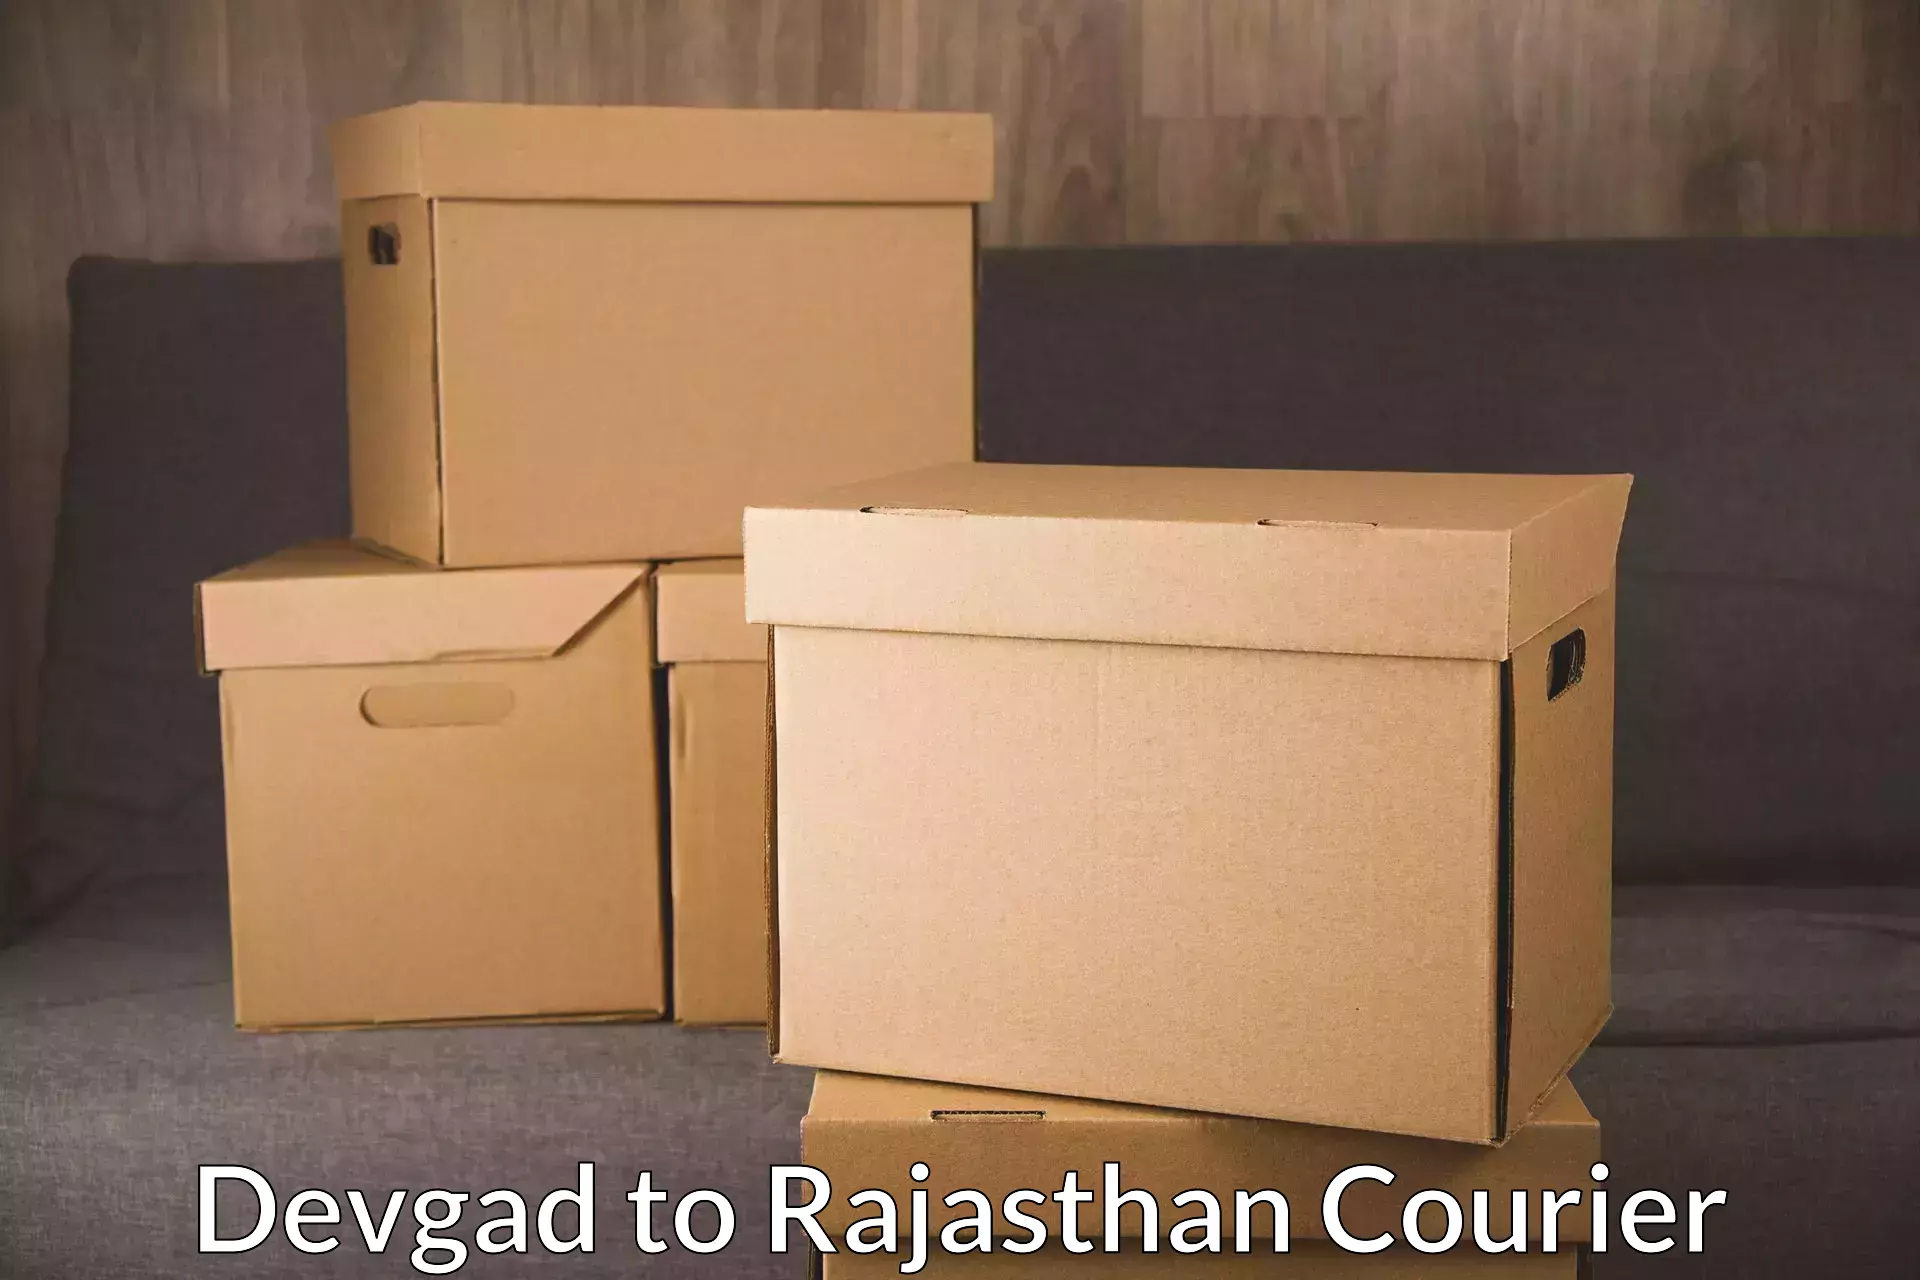 On-call courier service Devgad to Mathania